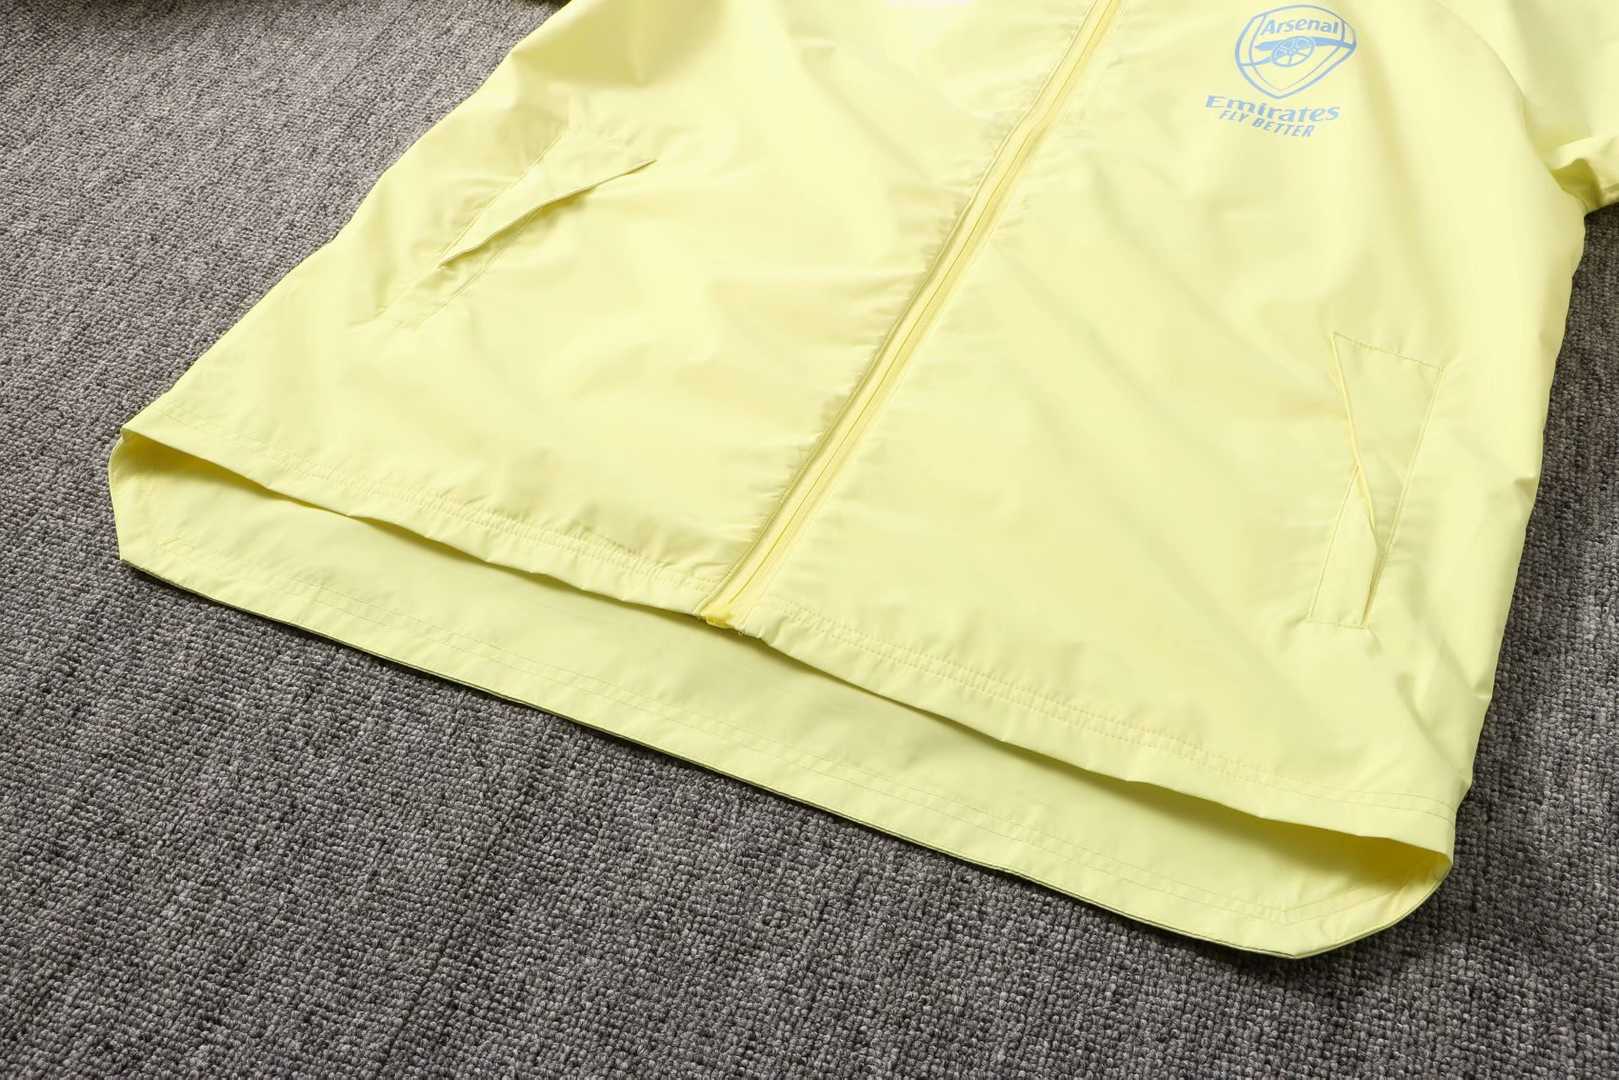 2020/21 Arsenal Yellow All Weather Windrunner Soccer Jacket Mens